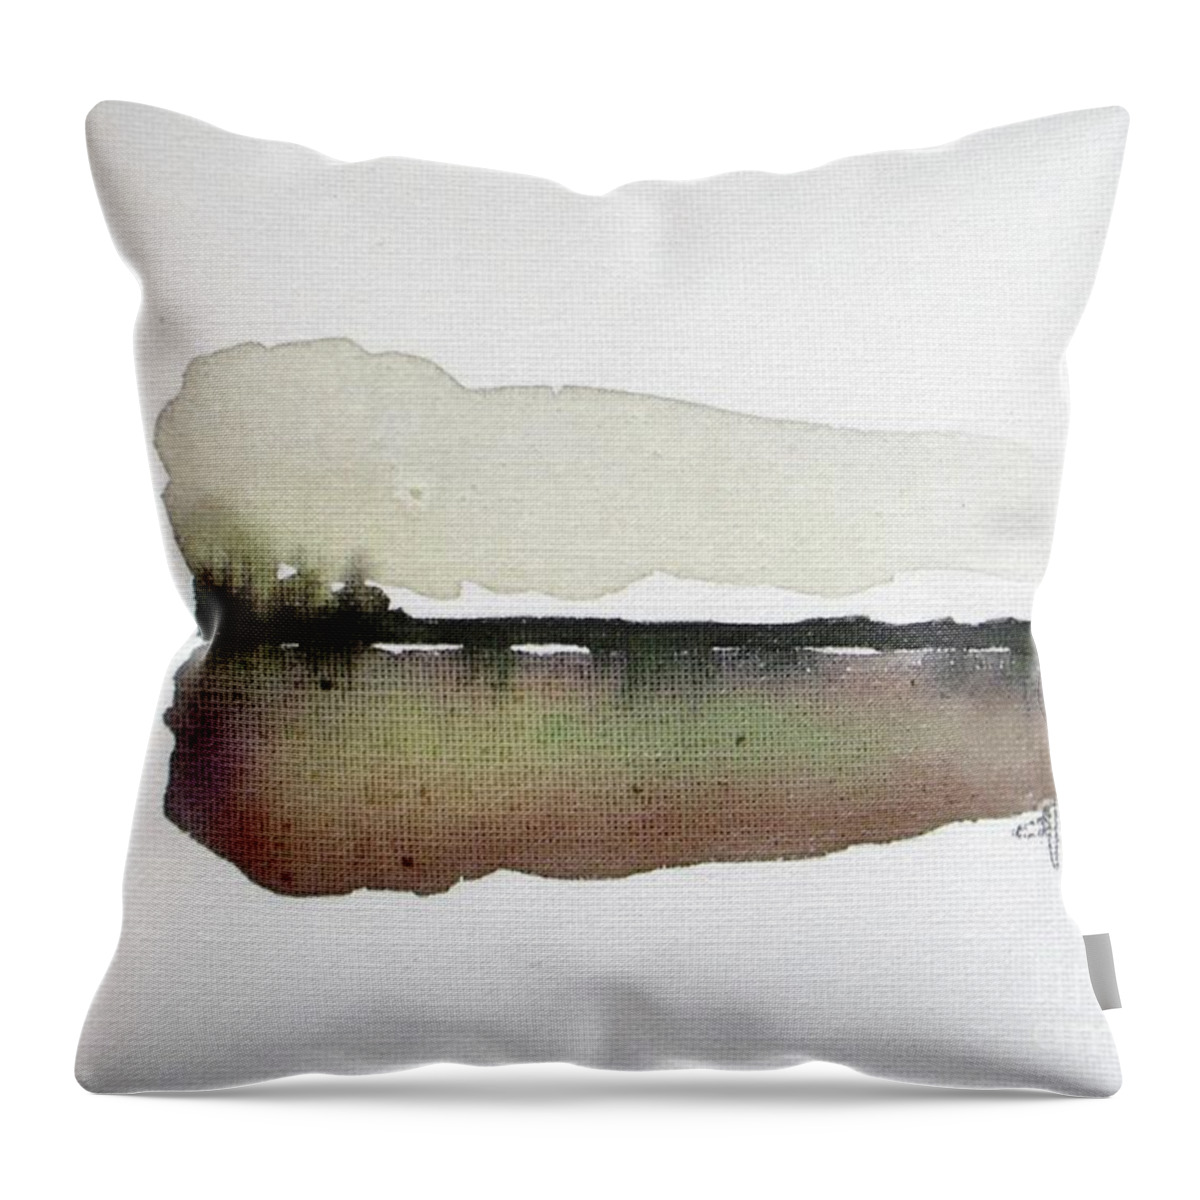 Abstract Throw Pillow featuring the painting Dusk Silence by Vesna Antic